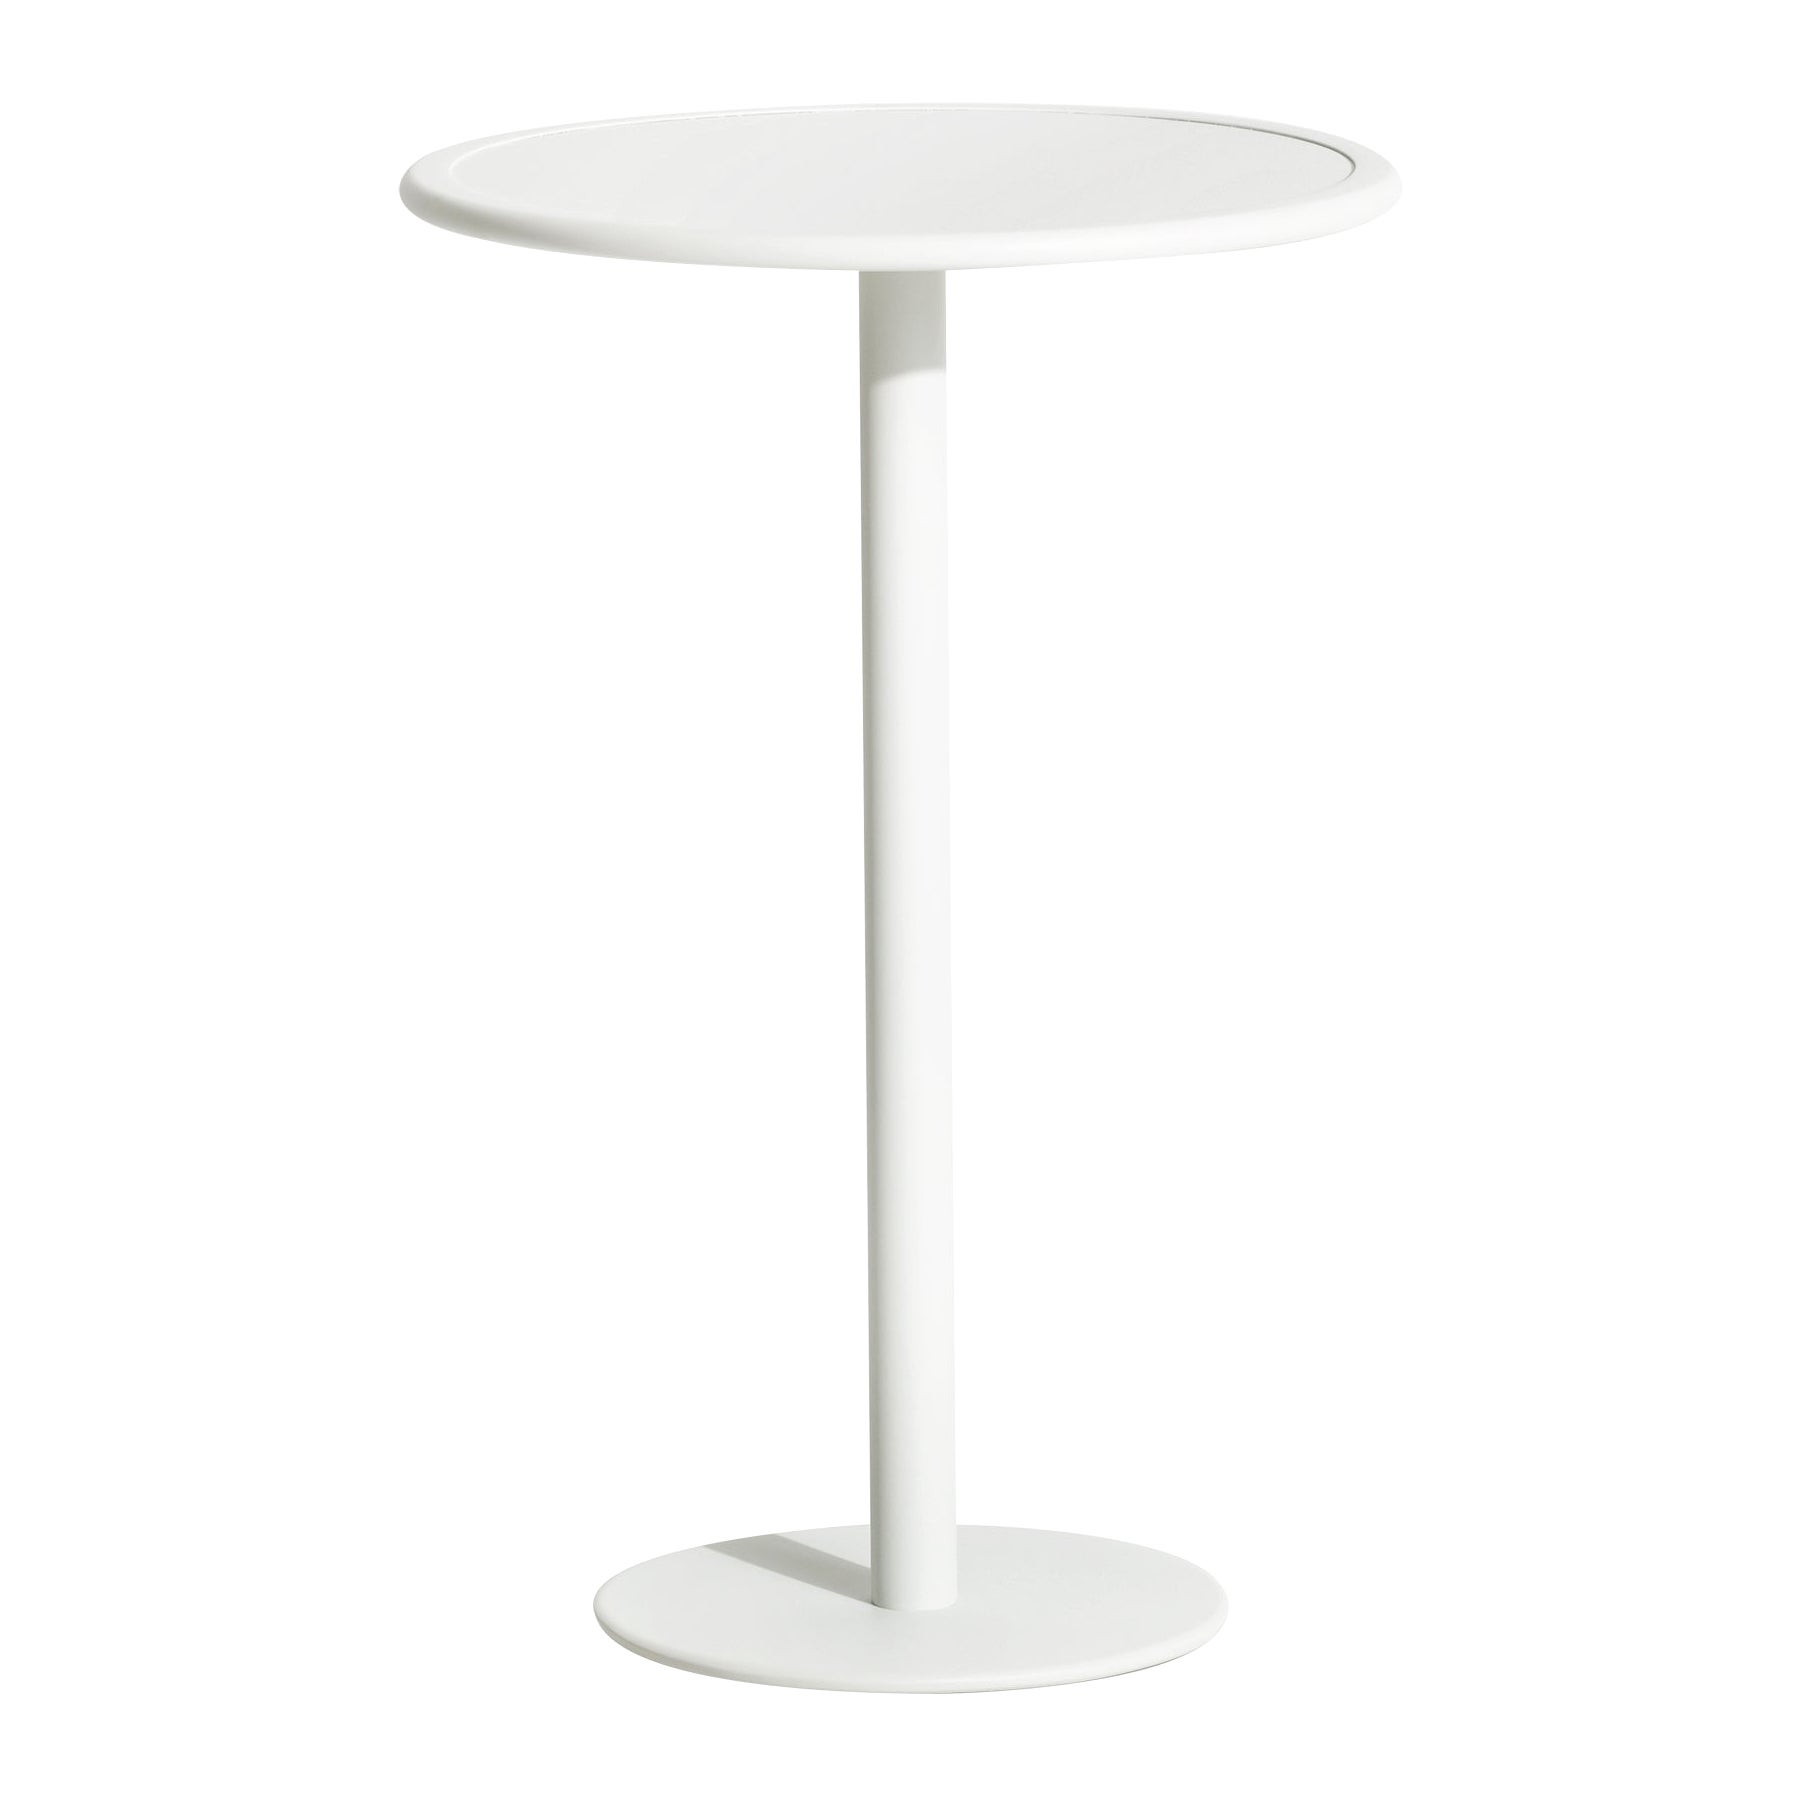 Petite Friture Week-End Round High Table in White Aluminium, 2017 For Sale